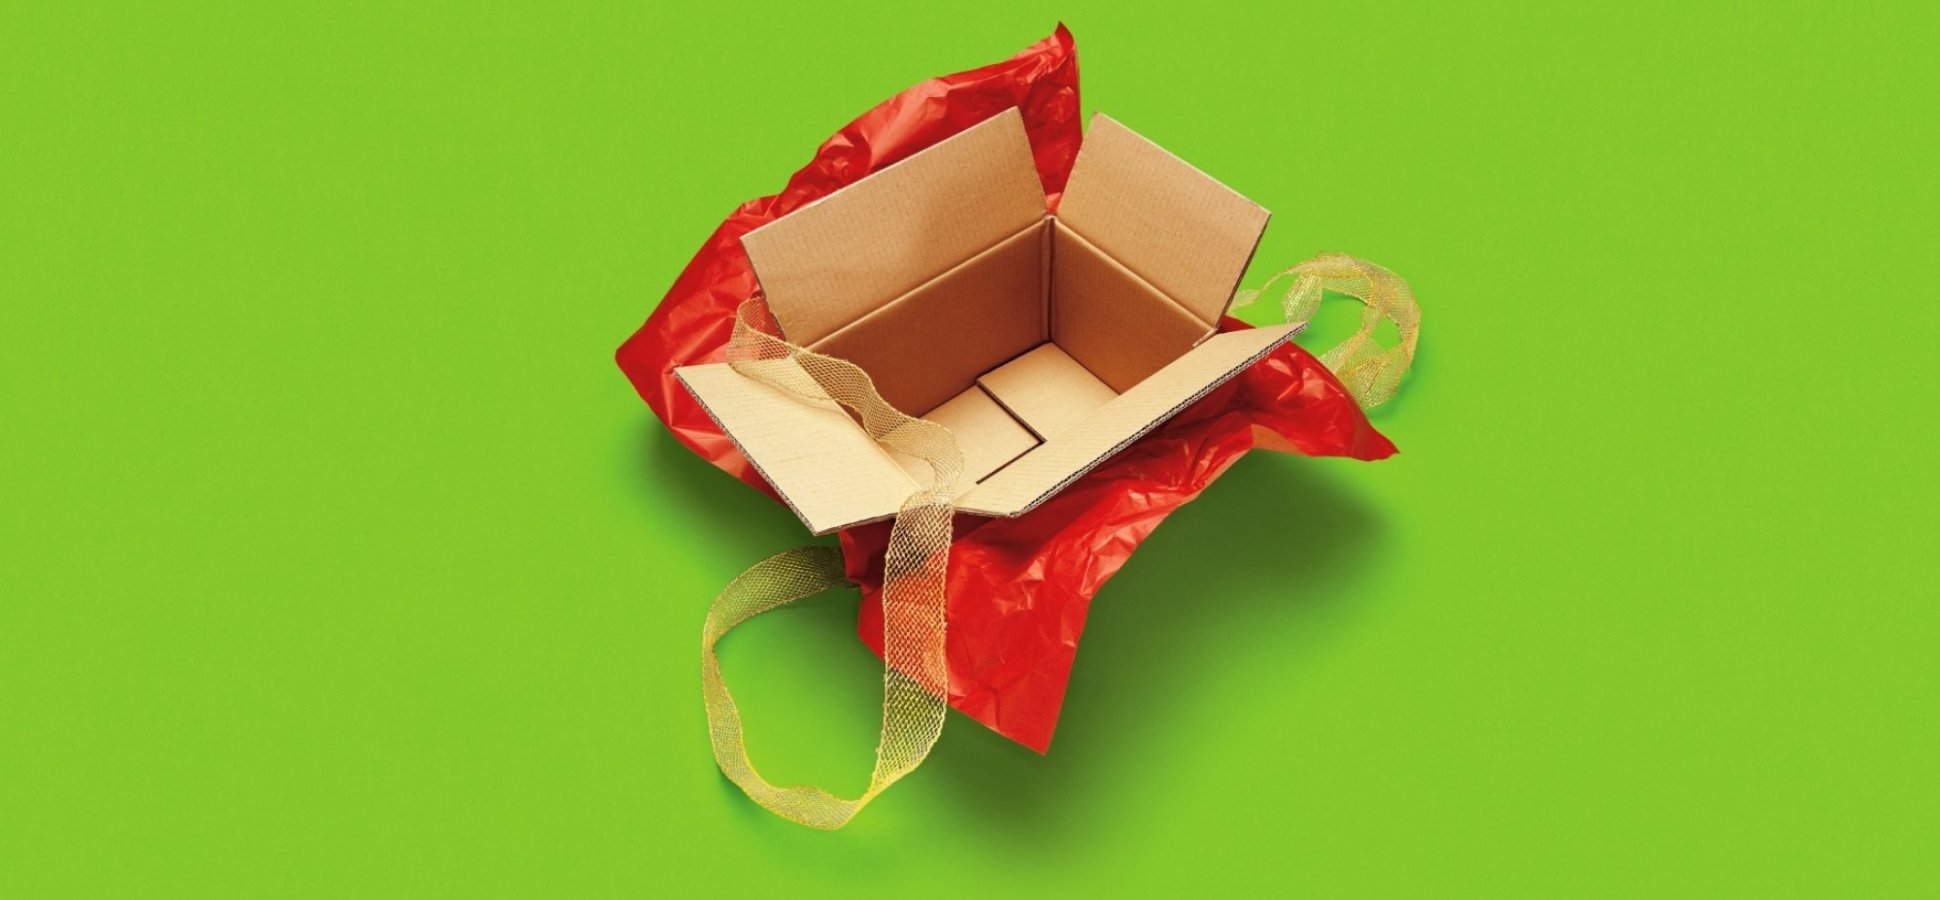 Use These Creative Strategies to Staff Up Before the Holidays